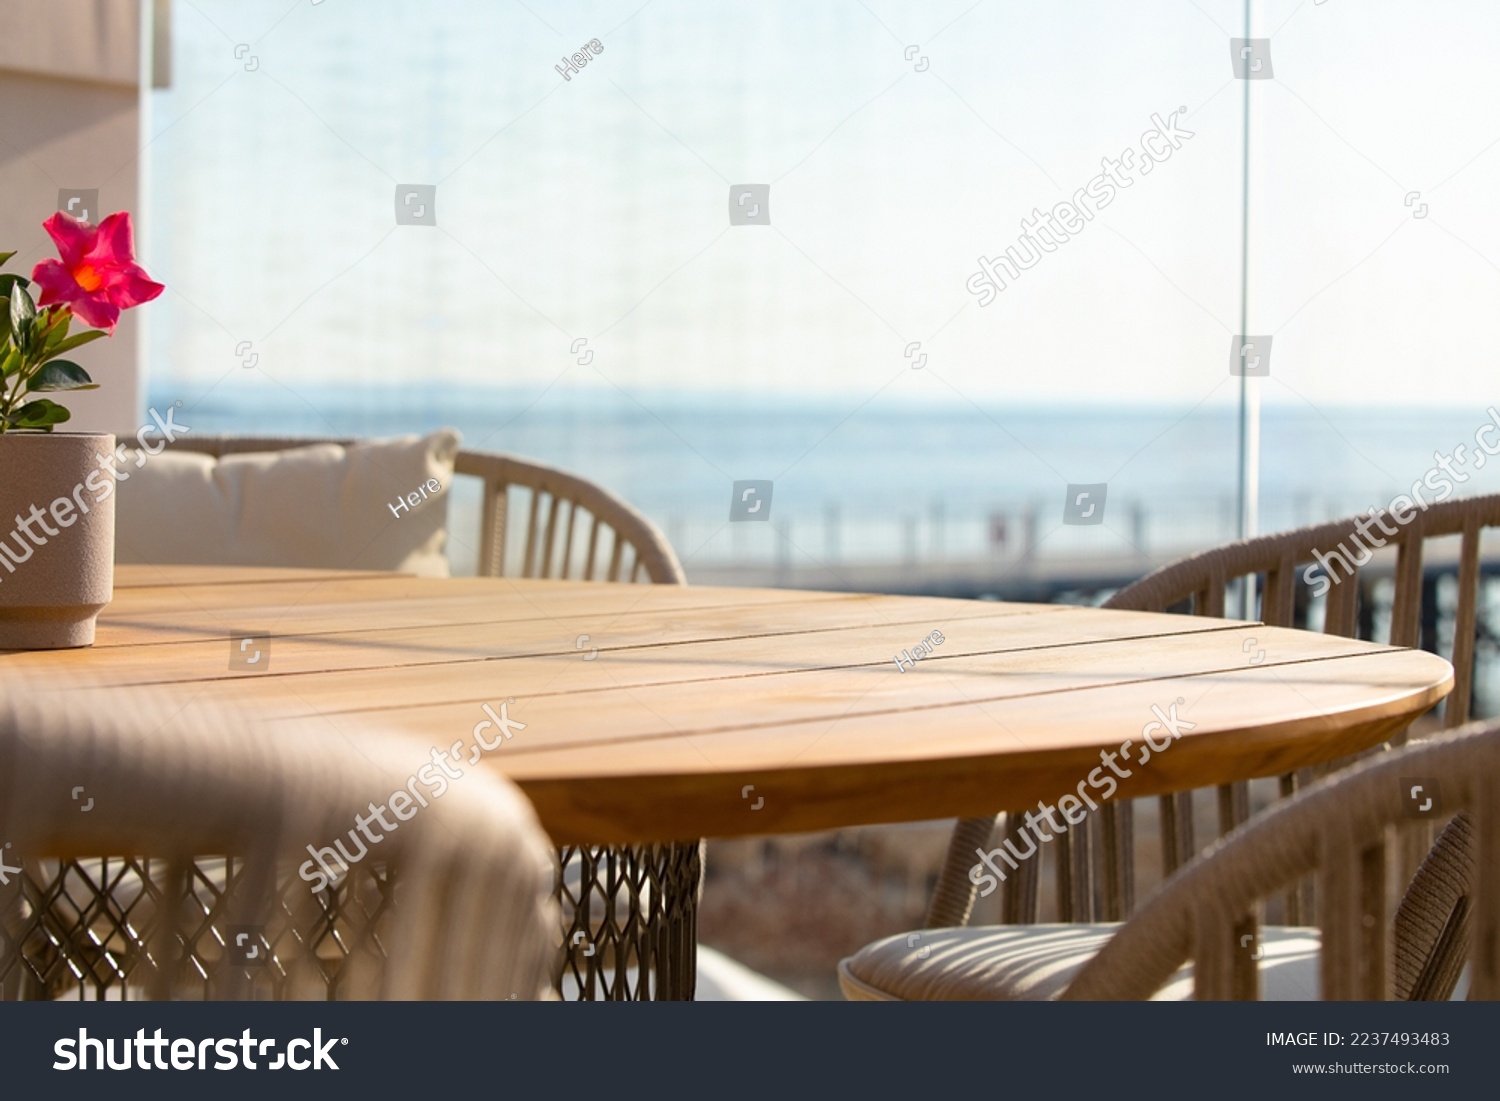 BLANK WOODEN TABLE AND SEA BACKGROUND, HOLIDAY RESORT BACKDROP BACKGROUNDS, TOURISM DESIGN #2237493483